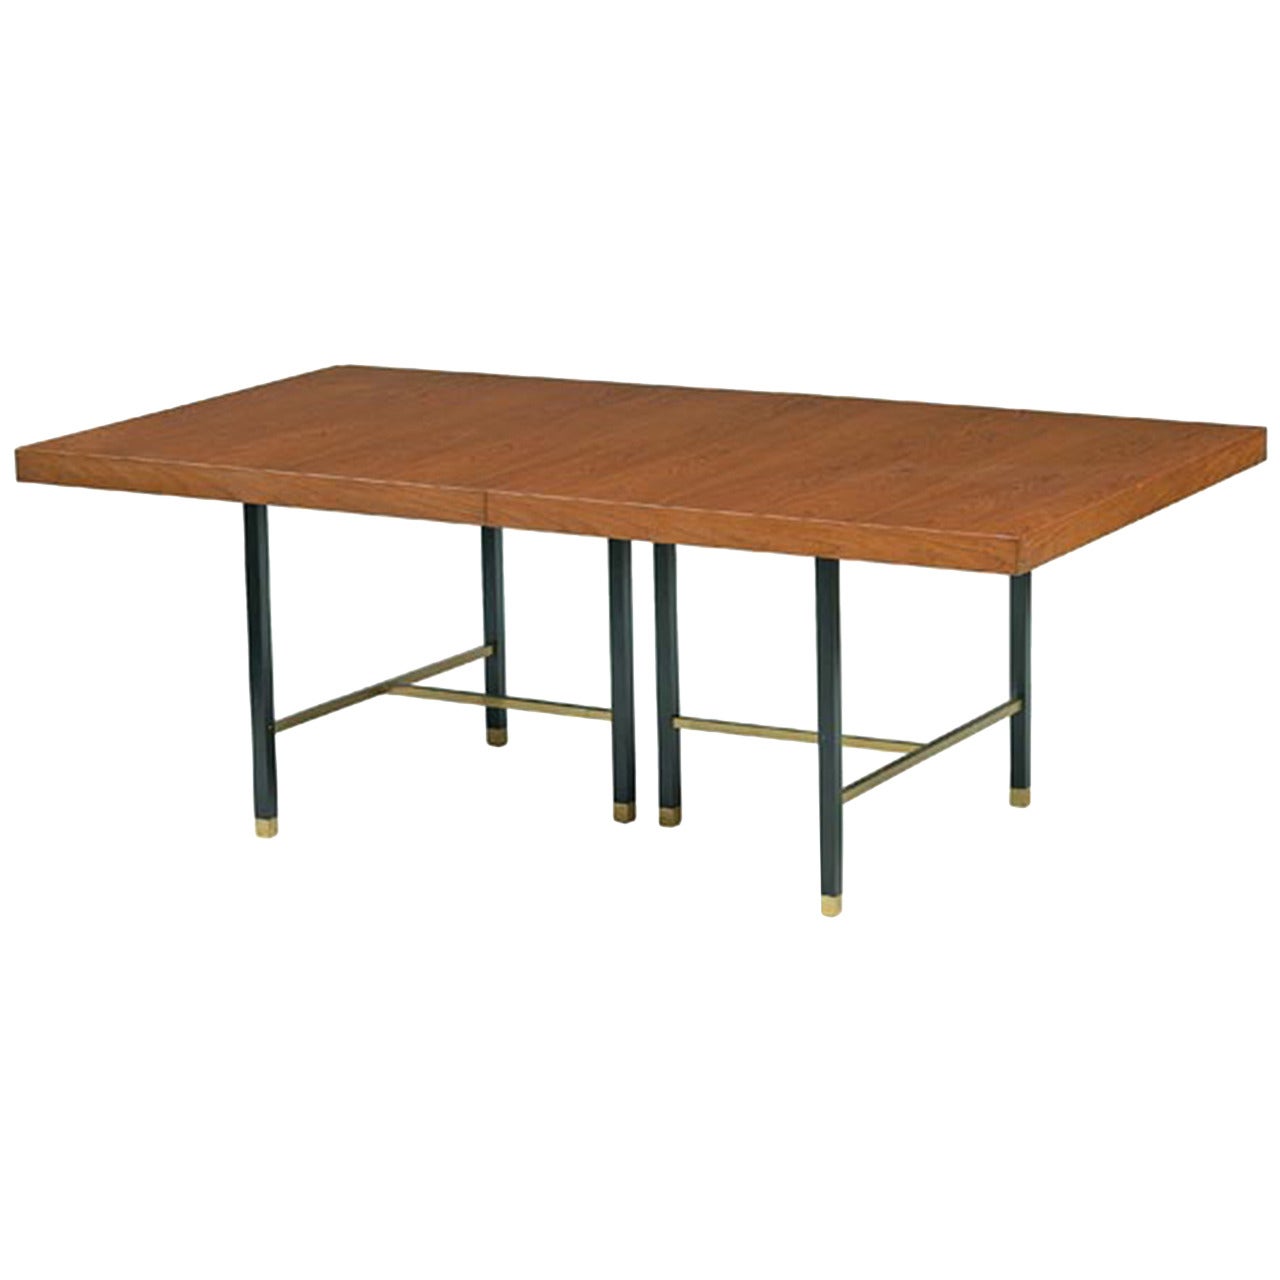 Architectural Harvey Probber Extension Dining Table